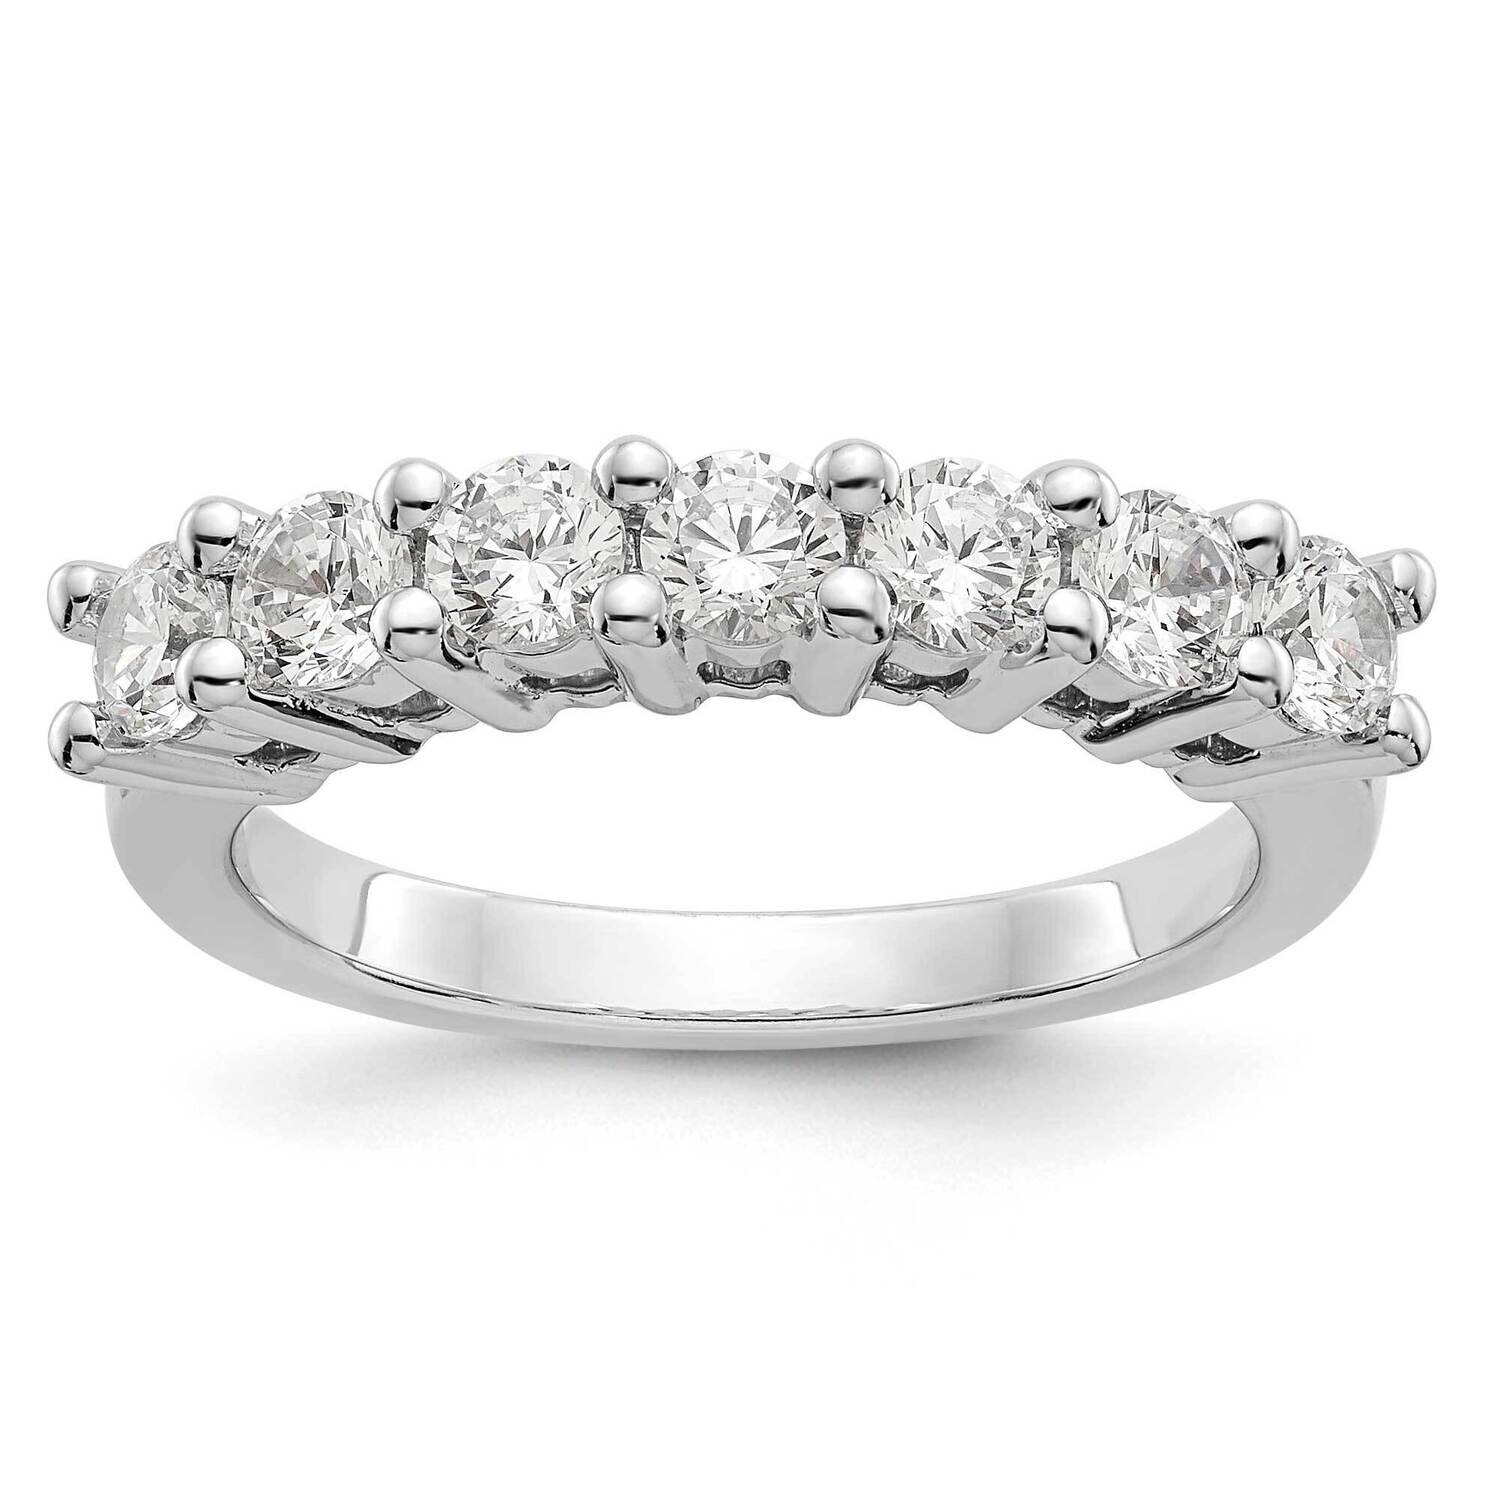 7-Stone Shared Prong Holds 7-3.0mm Round Diamond Band Ring Mounting 14k White Gold RM3295B-080-WAA